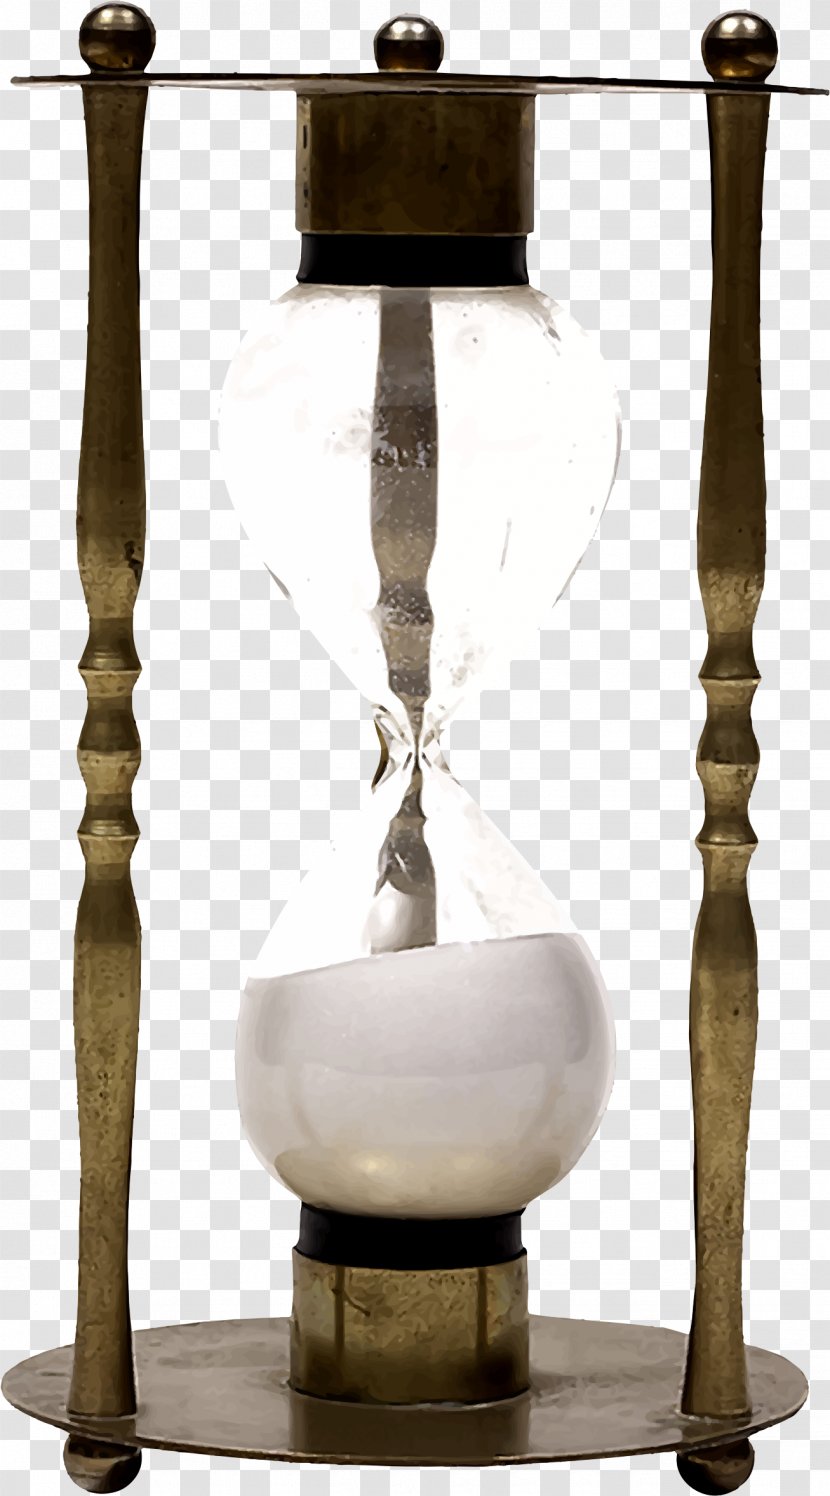 Hourglass Sands Of Time Clock Transparent PNG